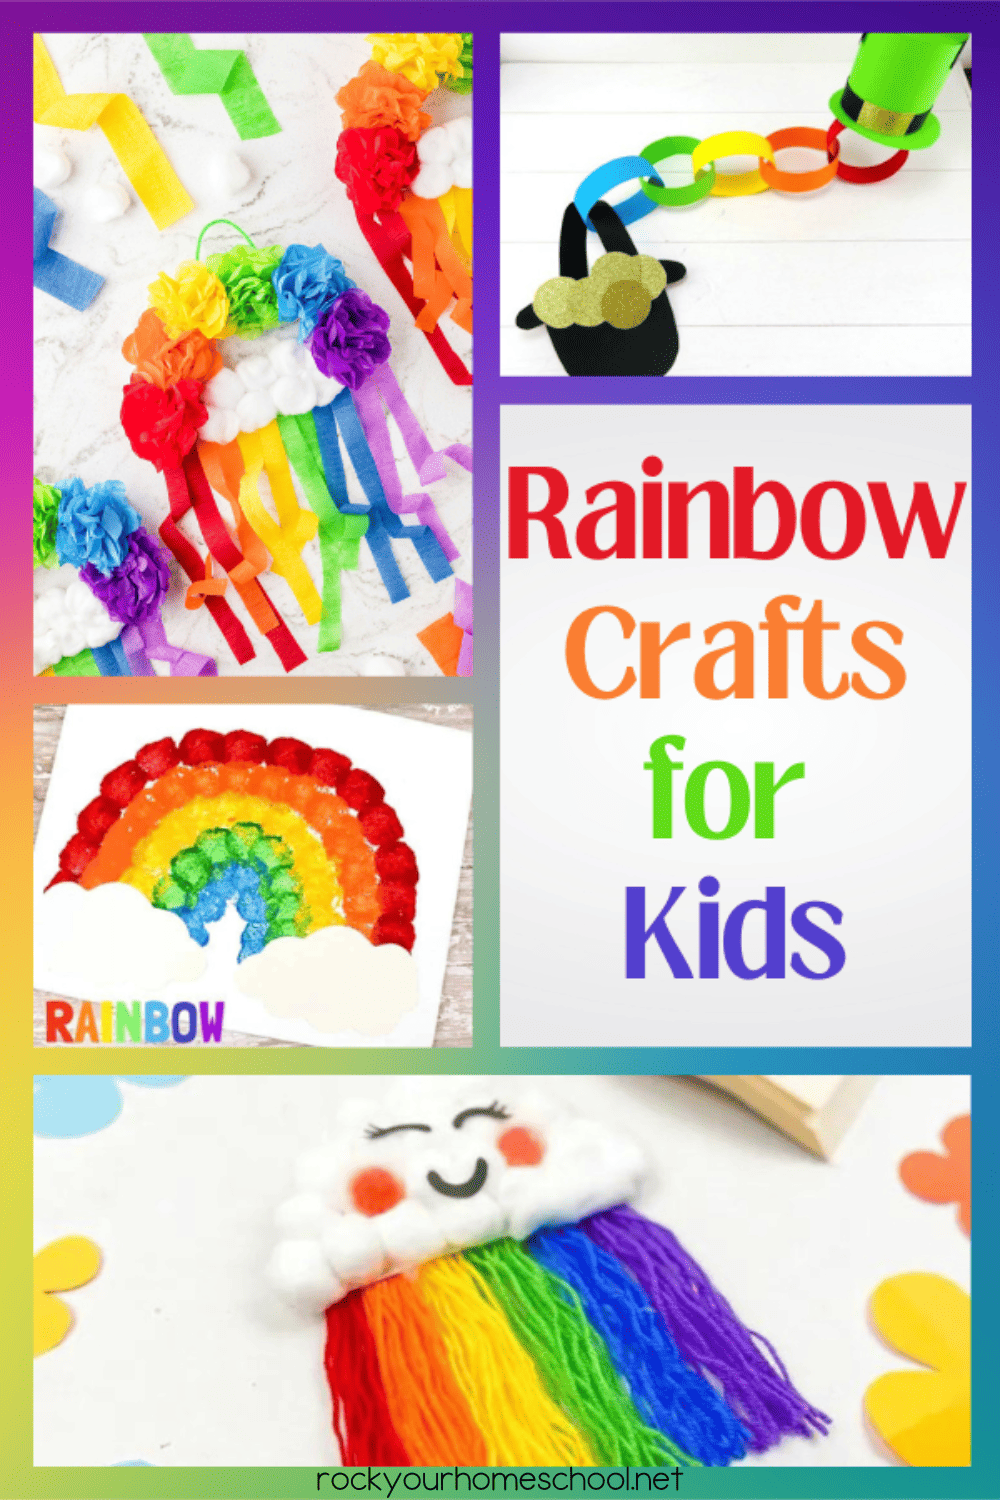 Examples of easy rainbow crafts for kids made with tissue paper, cotton balls, construction paper, and yarn in a rainbow of colors.